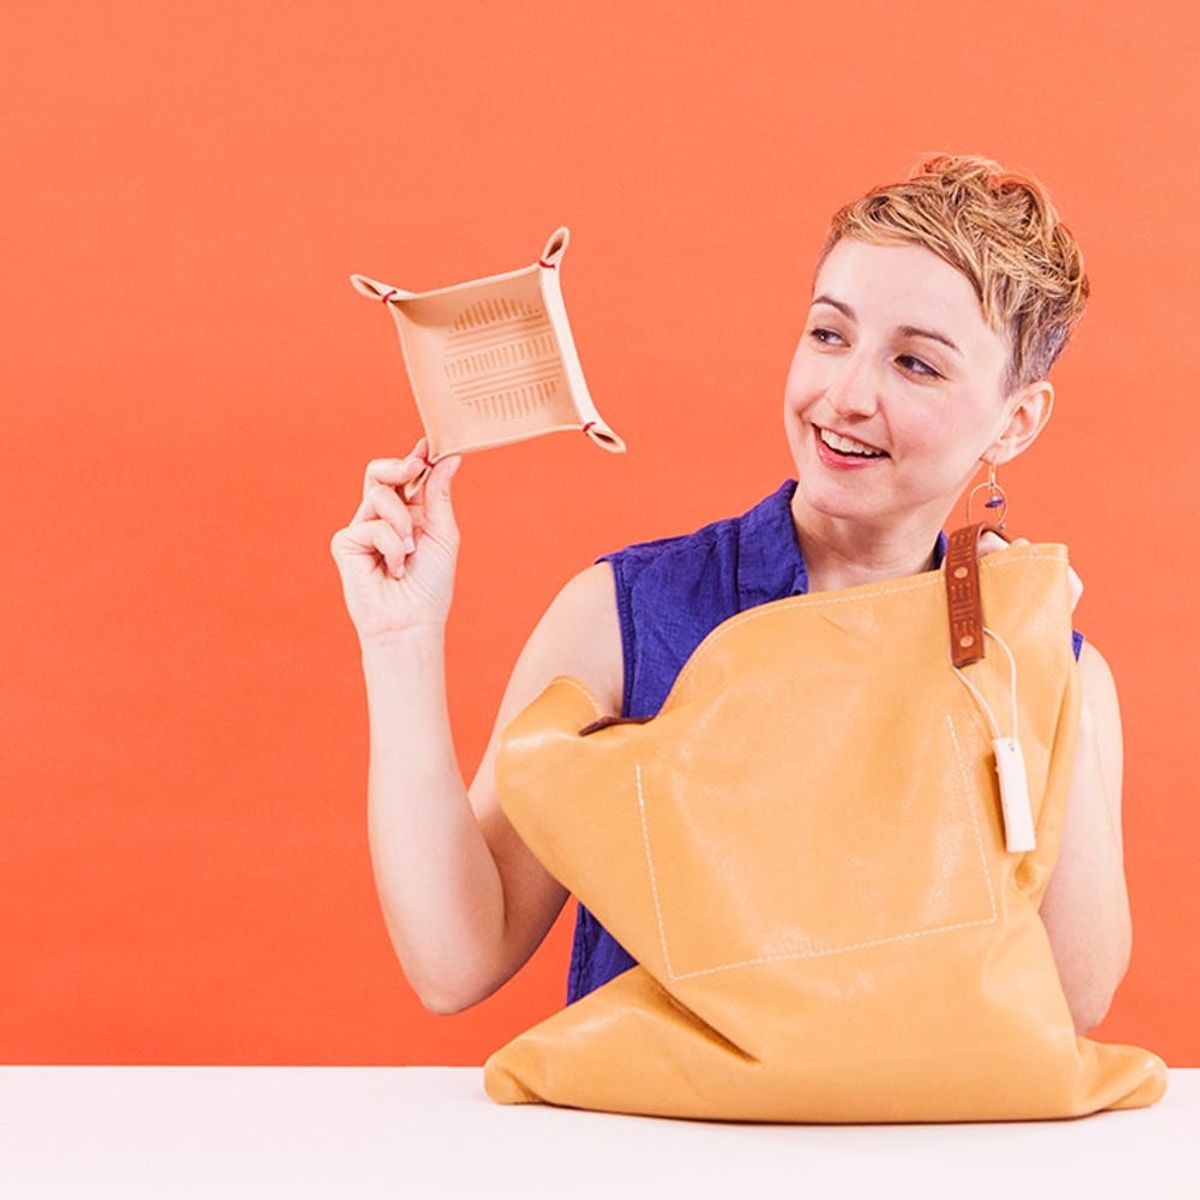 Learn to Make Leather Goods for Under $20